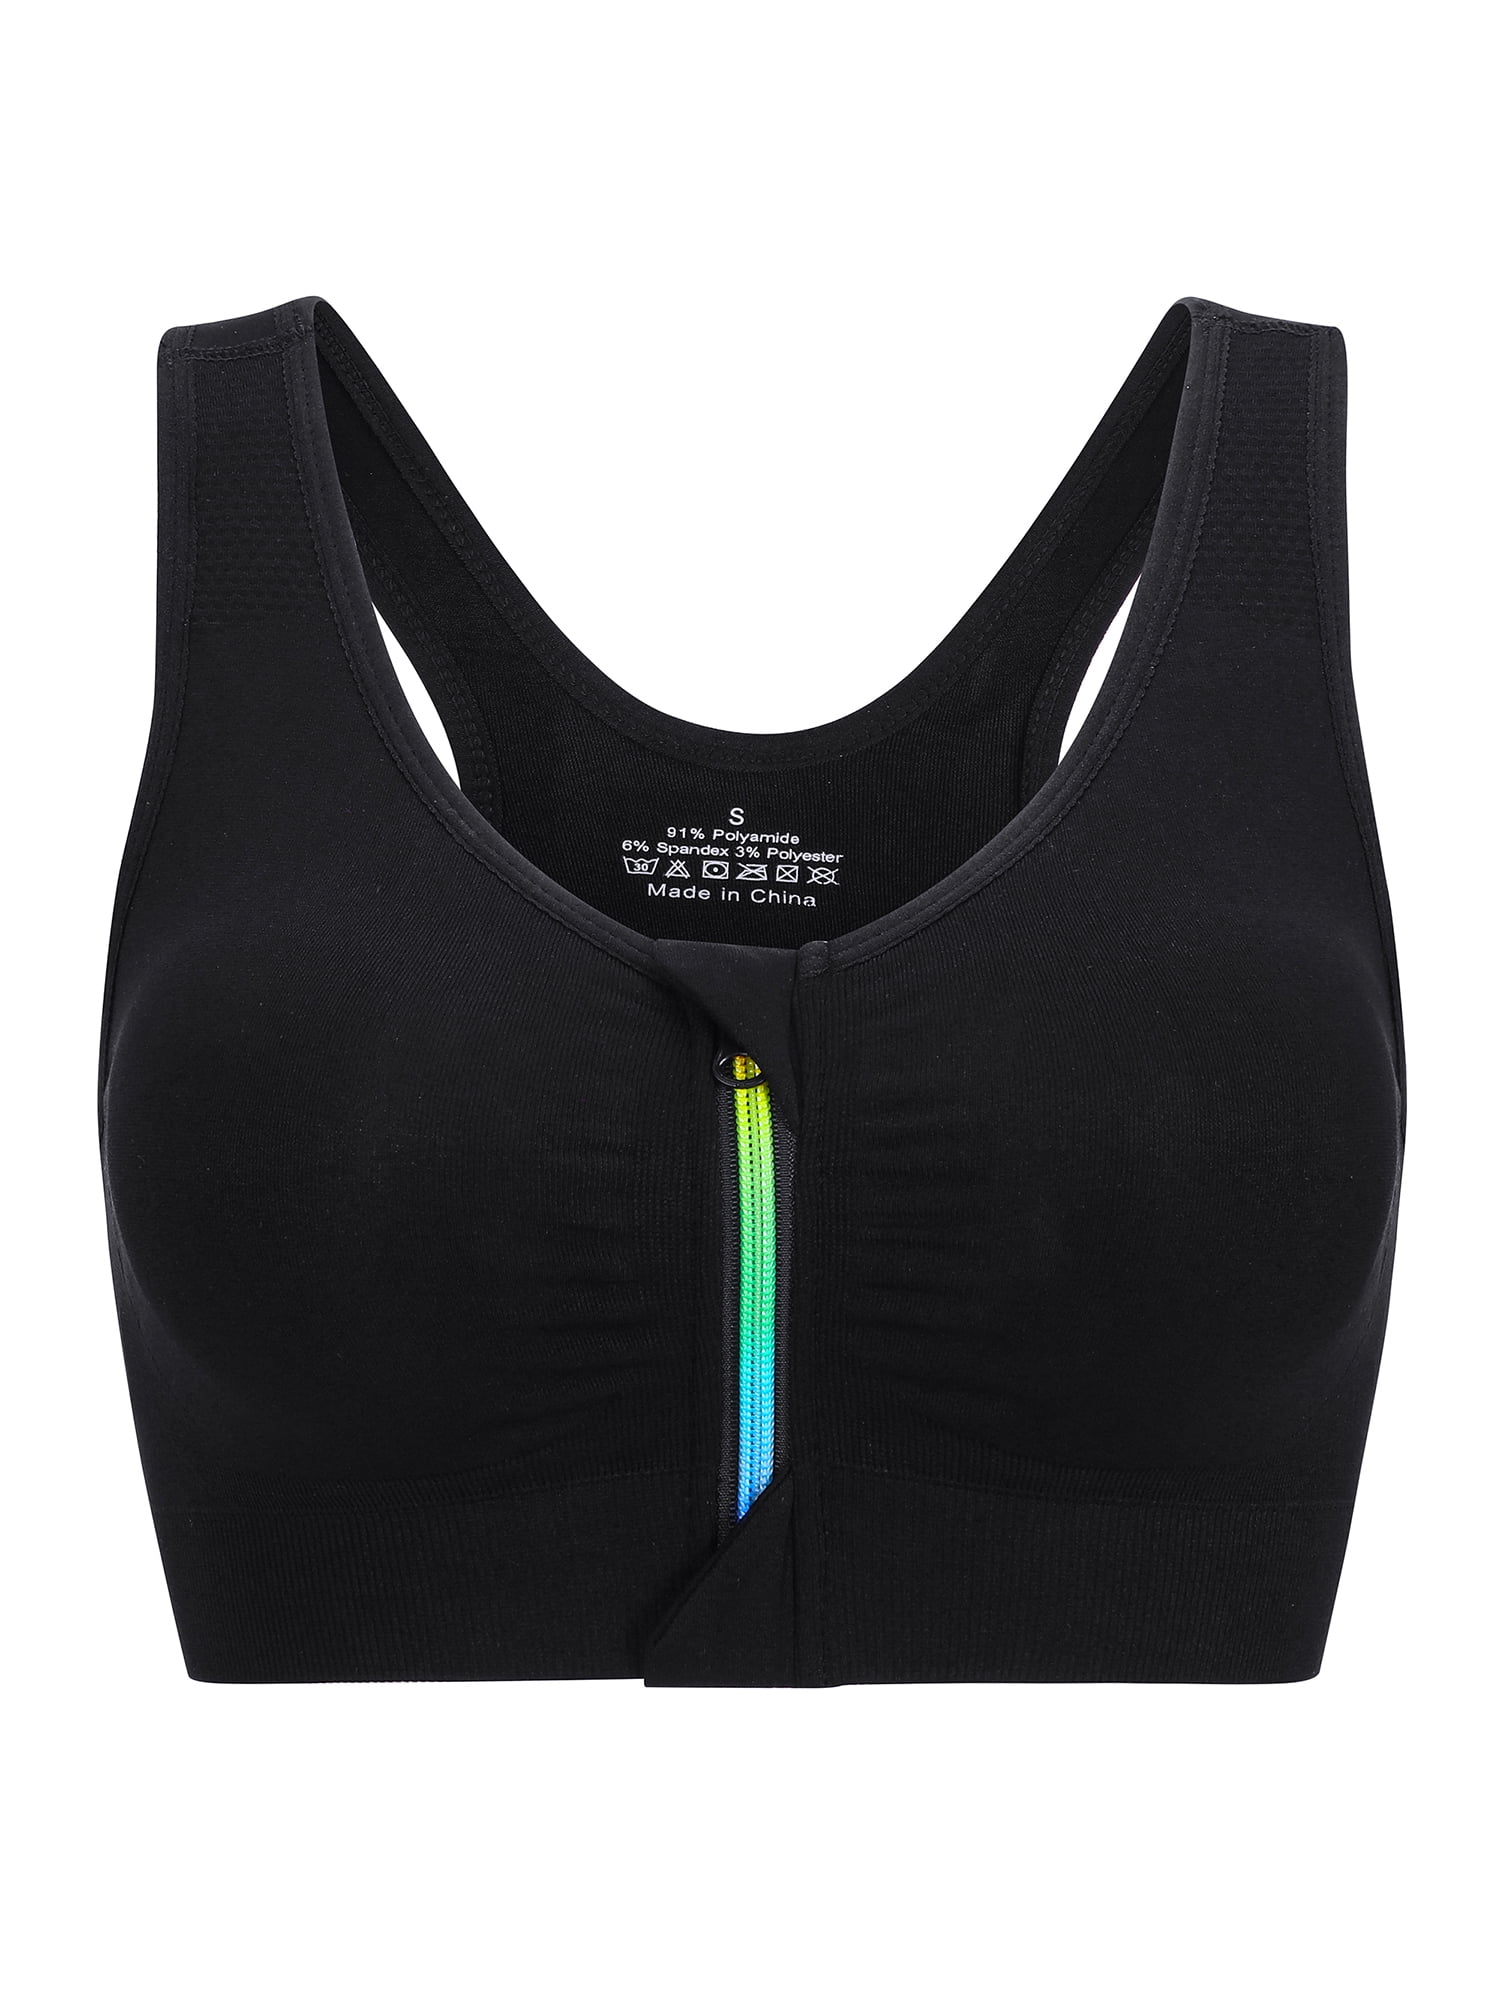 Women's Soft Racerback Sports Bra Removable Pads Yoga Running Workout Bra  With Good Support 